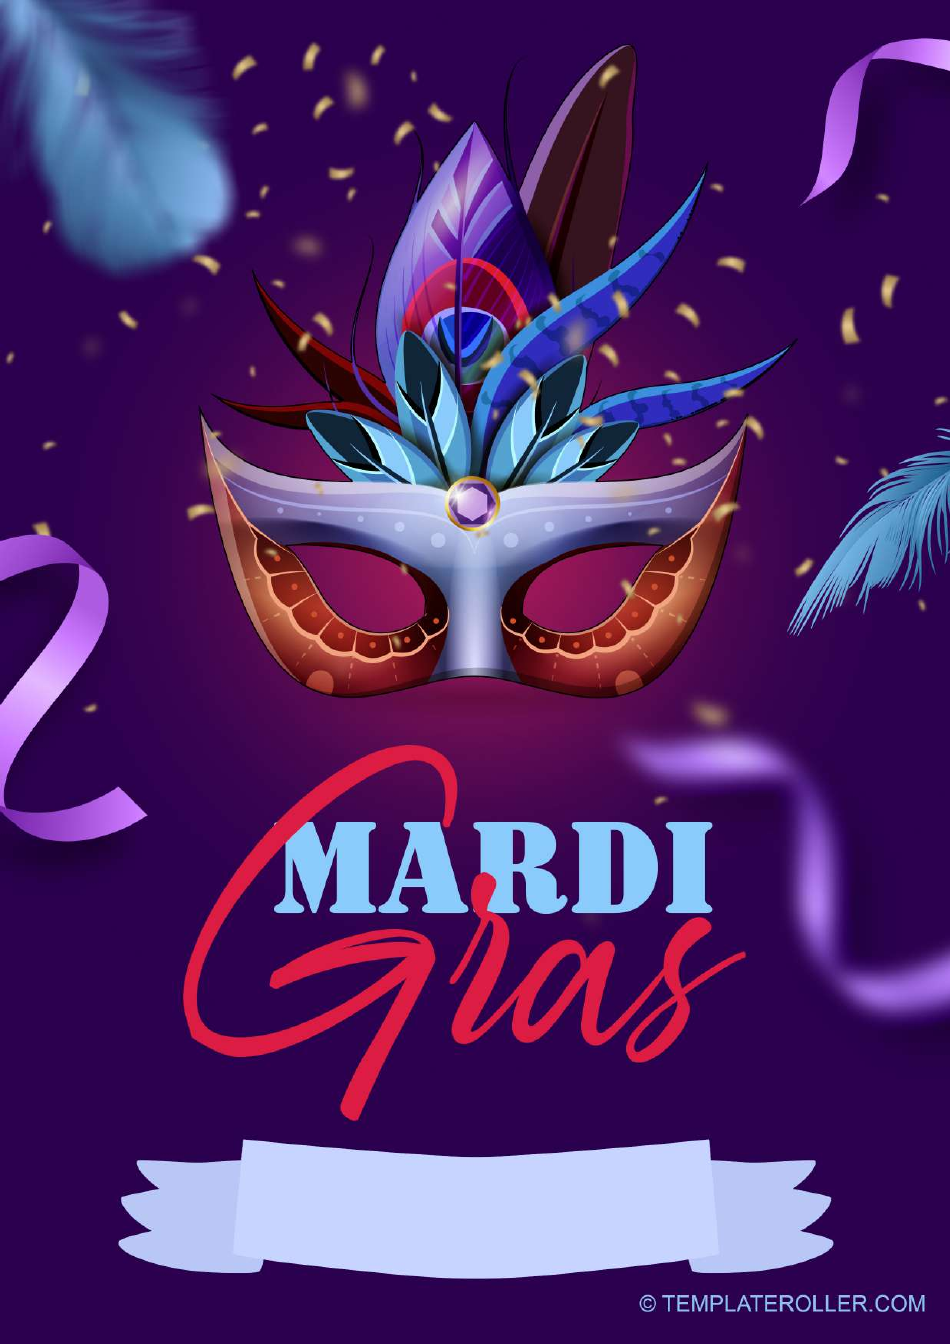 Mardi Gras Poster Template with Violet Design